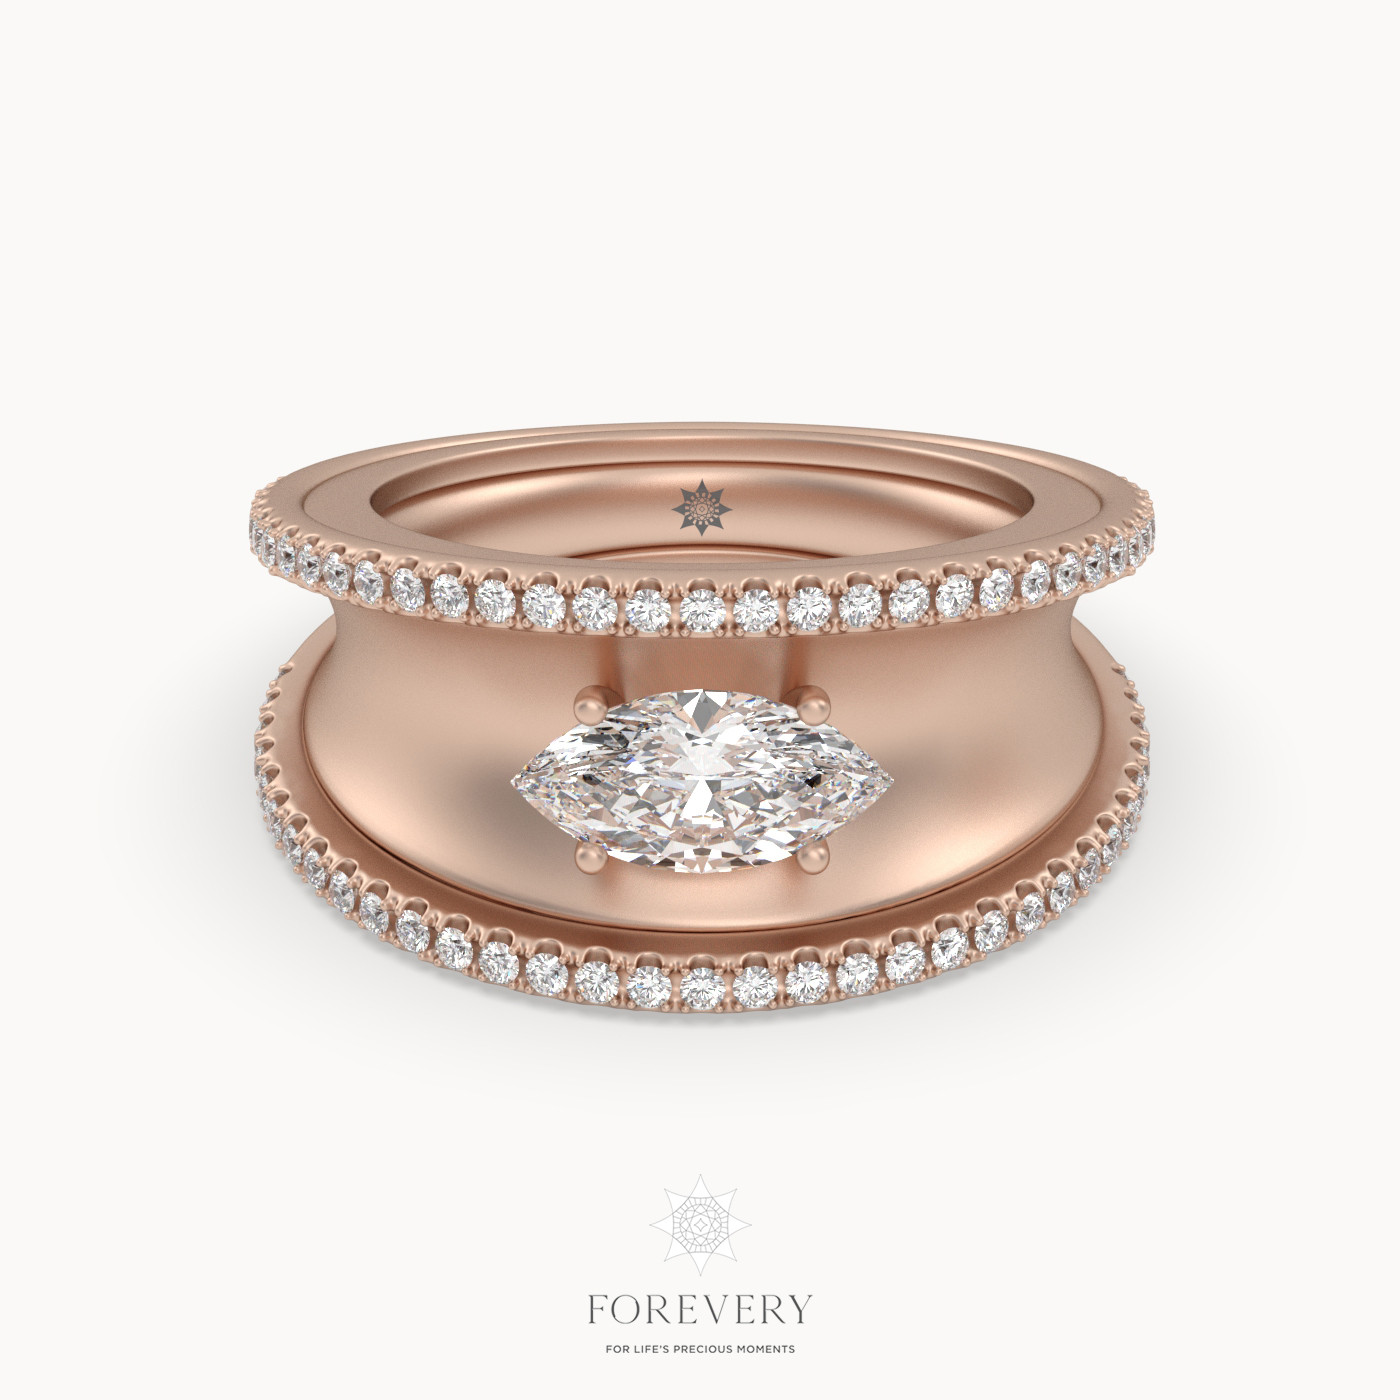 18K ROSE GOLD Marquise Diamond Center with Double Row of Diamonds